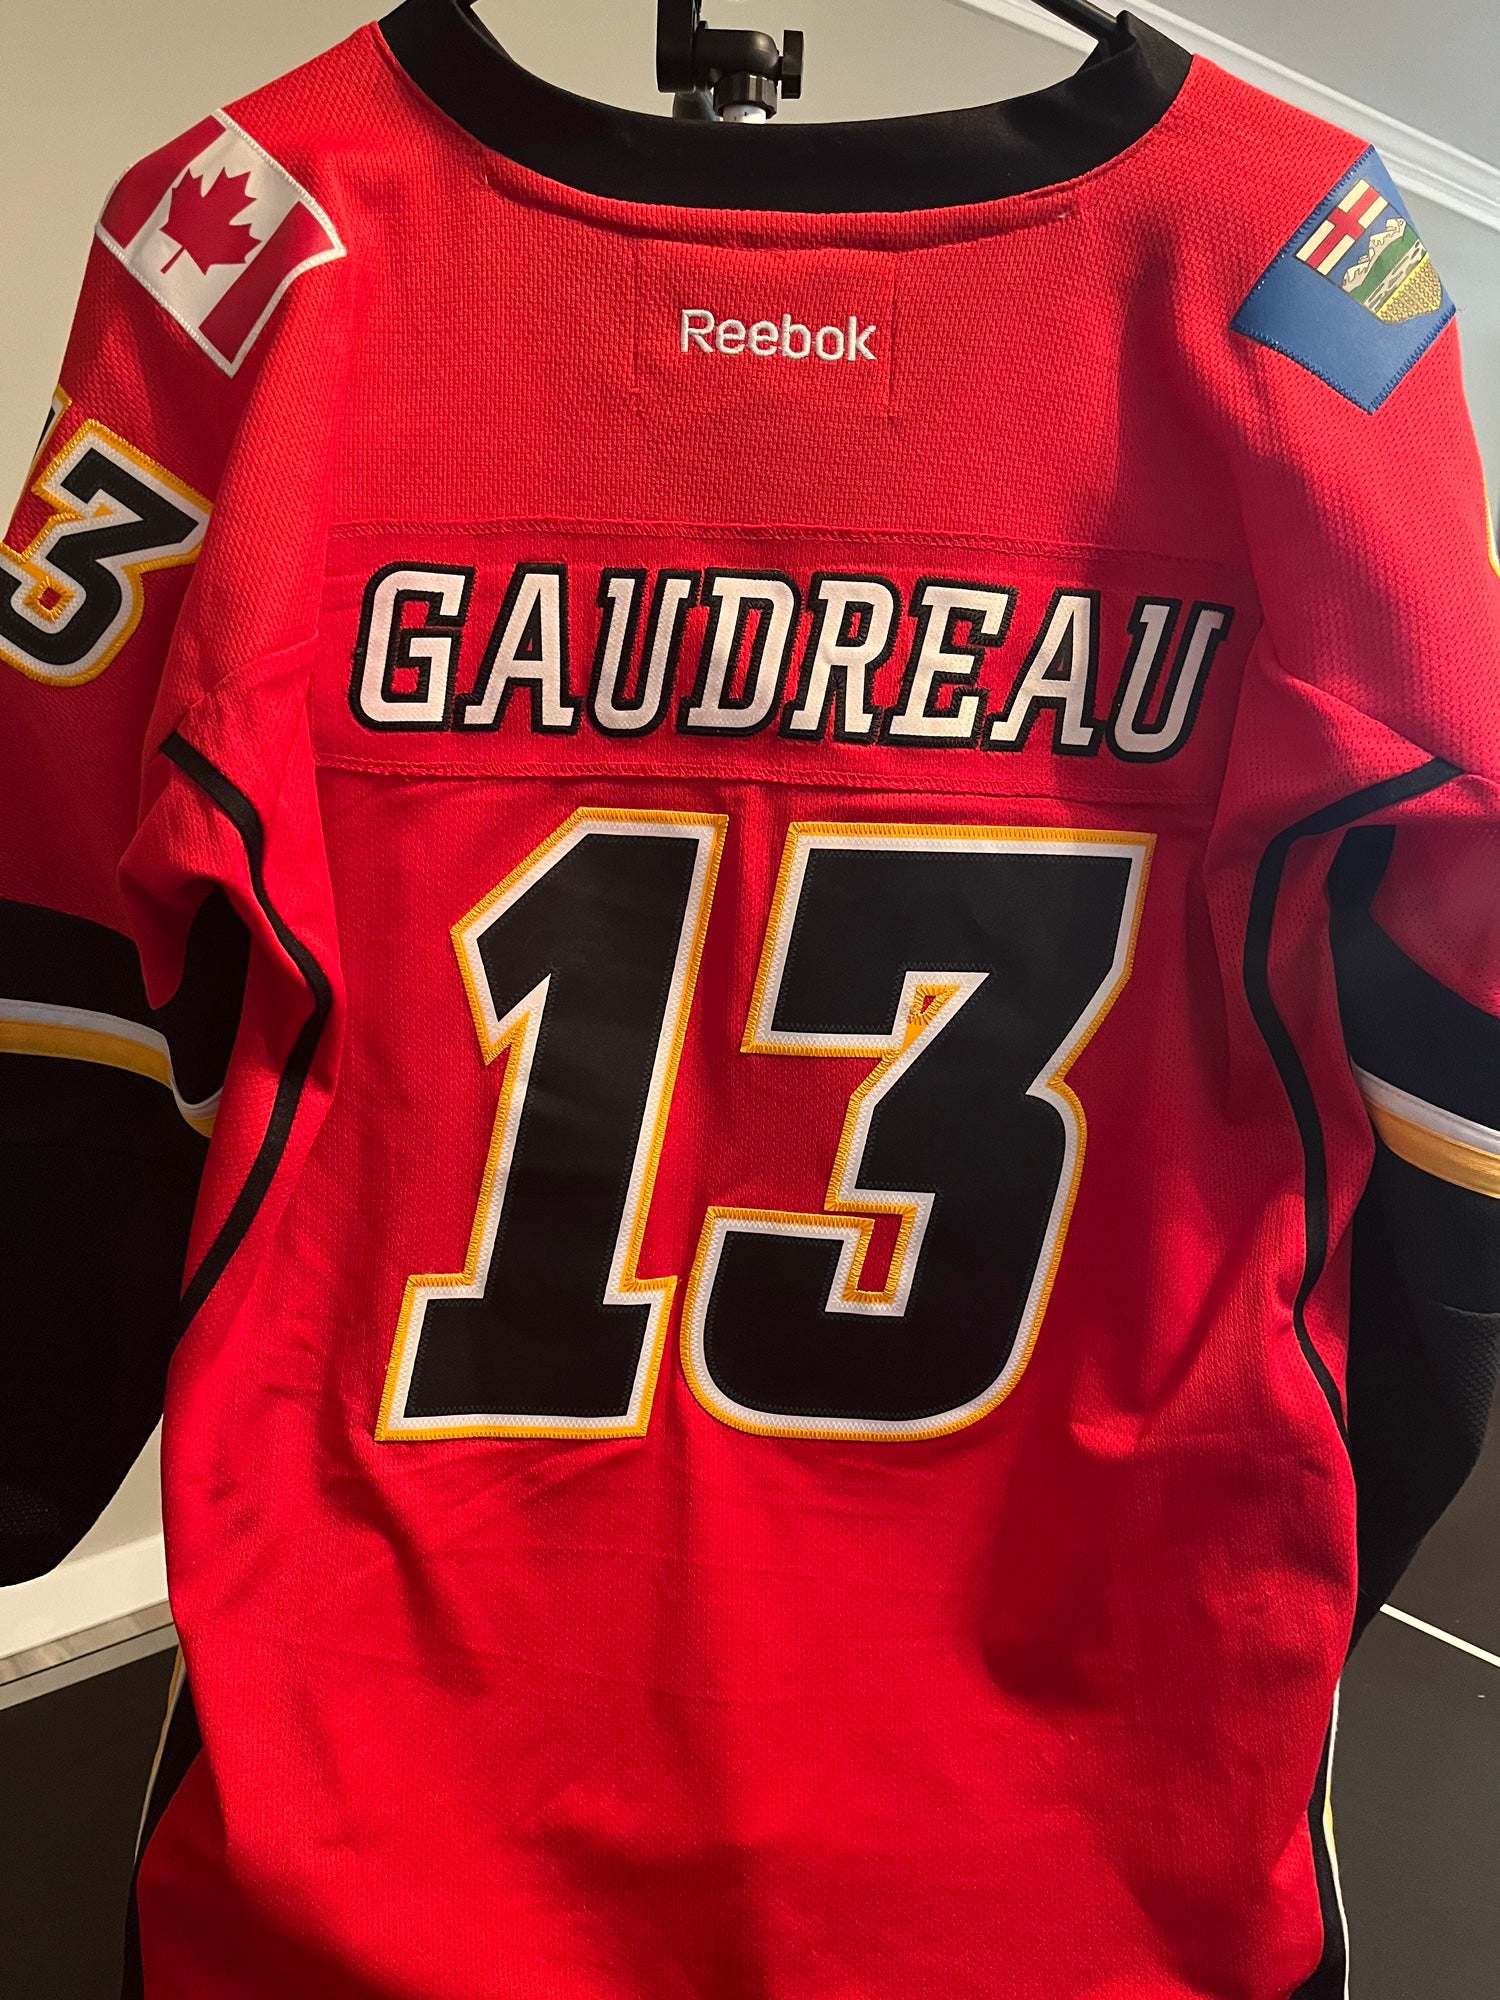 Reebok Johnny Gaudreau #13 Calgary Flames Authentic Home Jersey Sewn Size 52